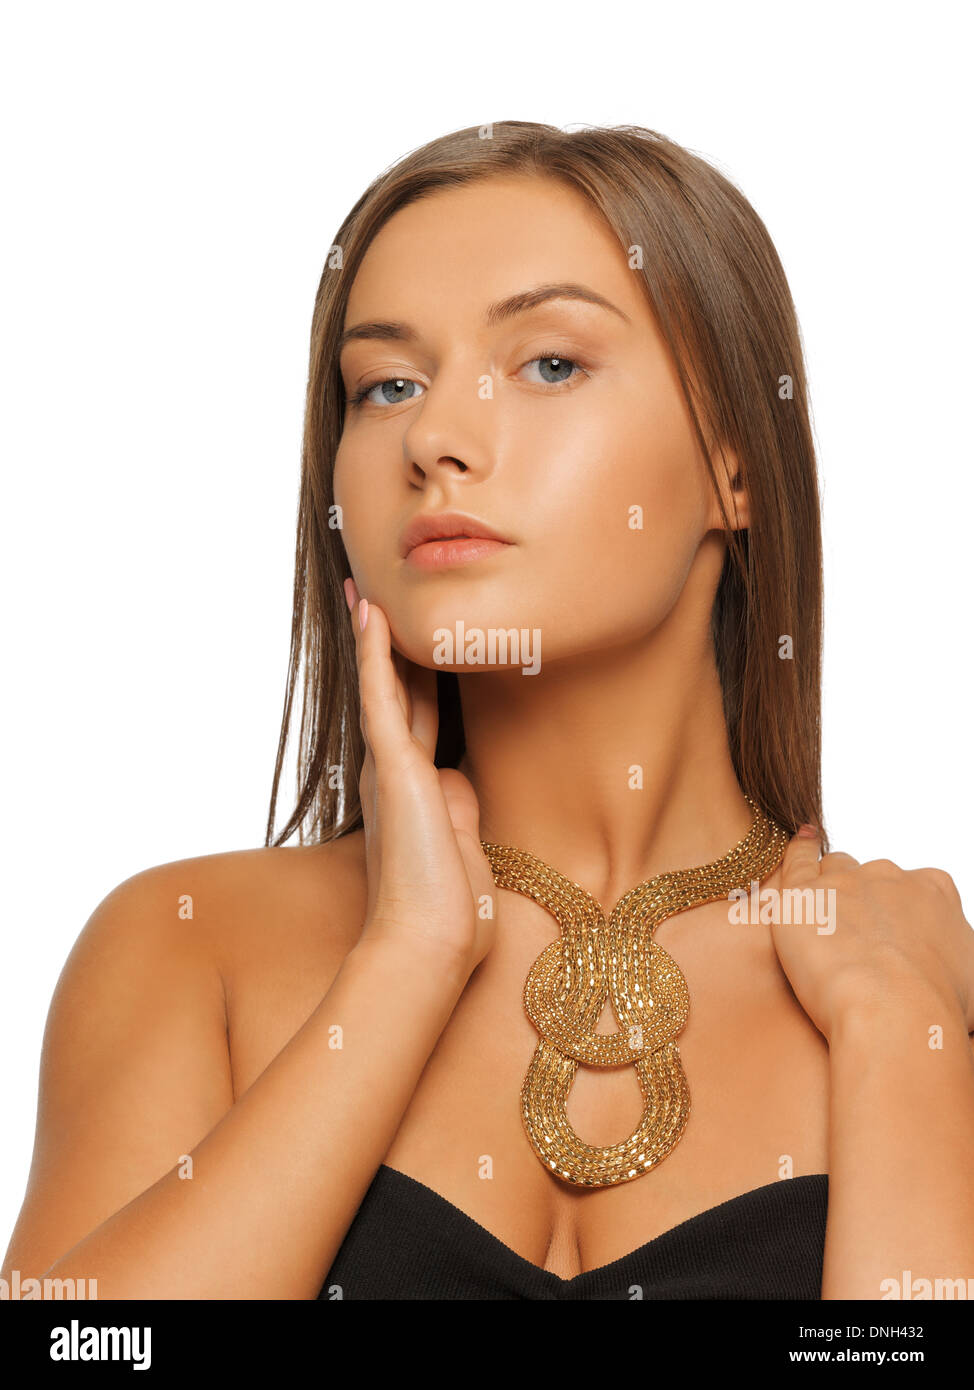 beautiful woman with necklace Stock Photo